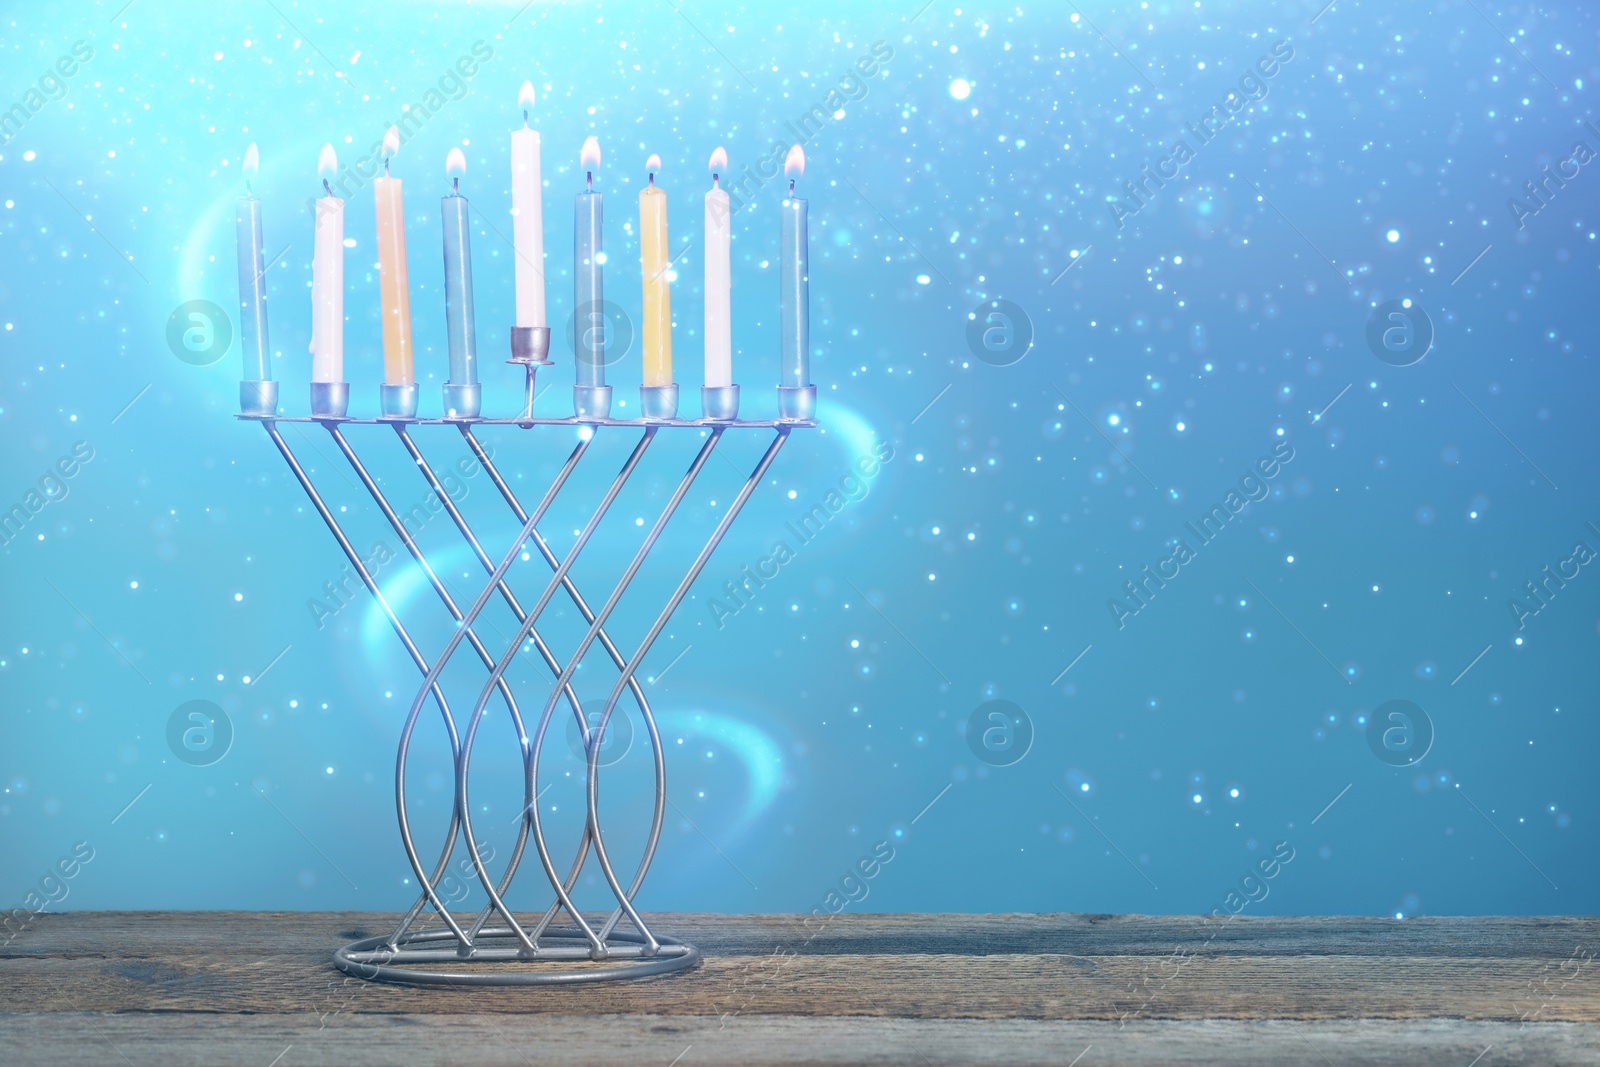 Image of Hanukkah celebration. Menorah with burning candles on wooden table against light blue background, space for text